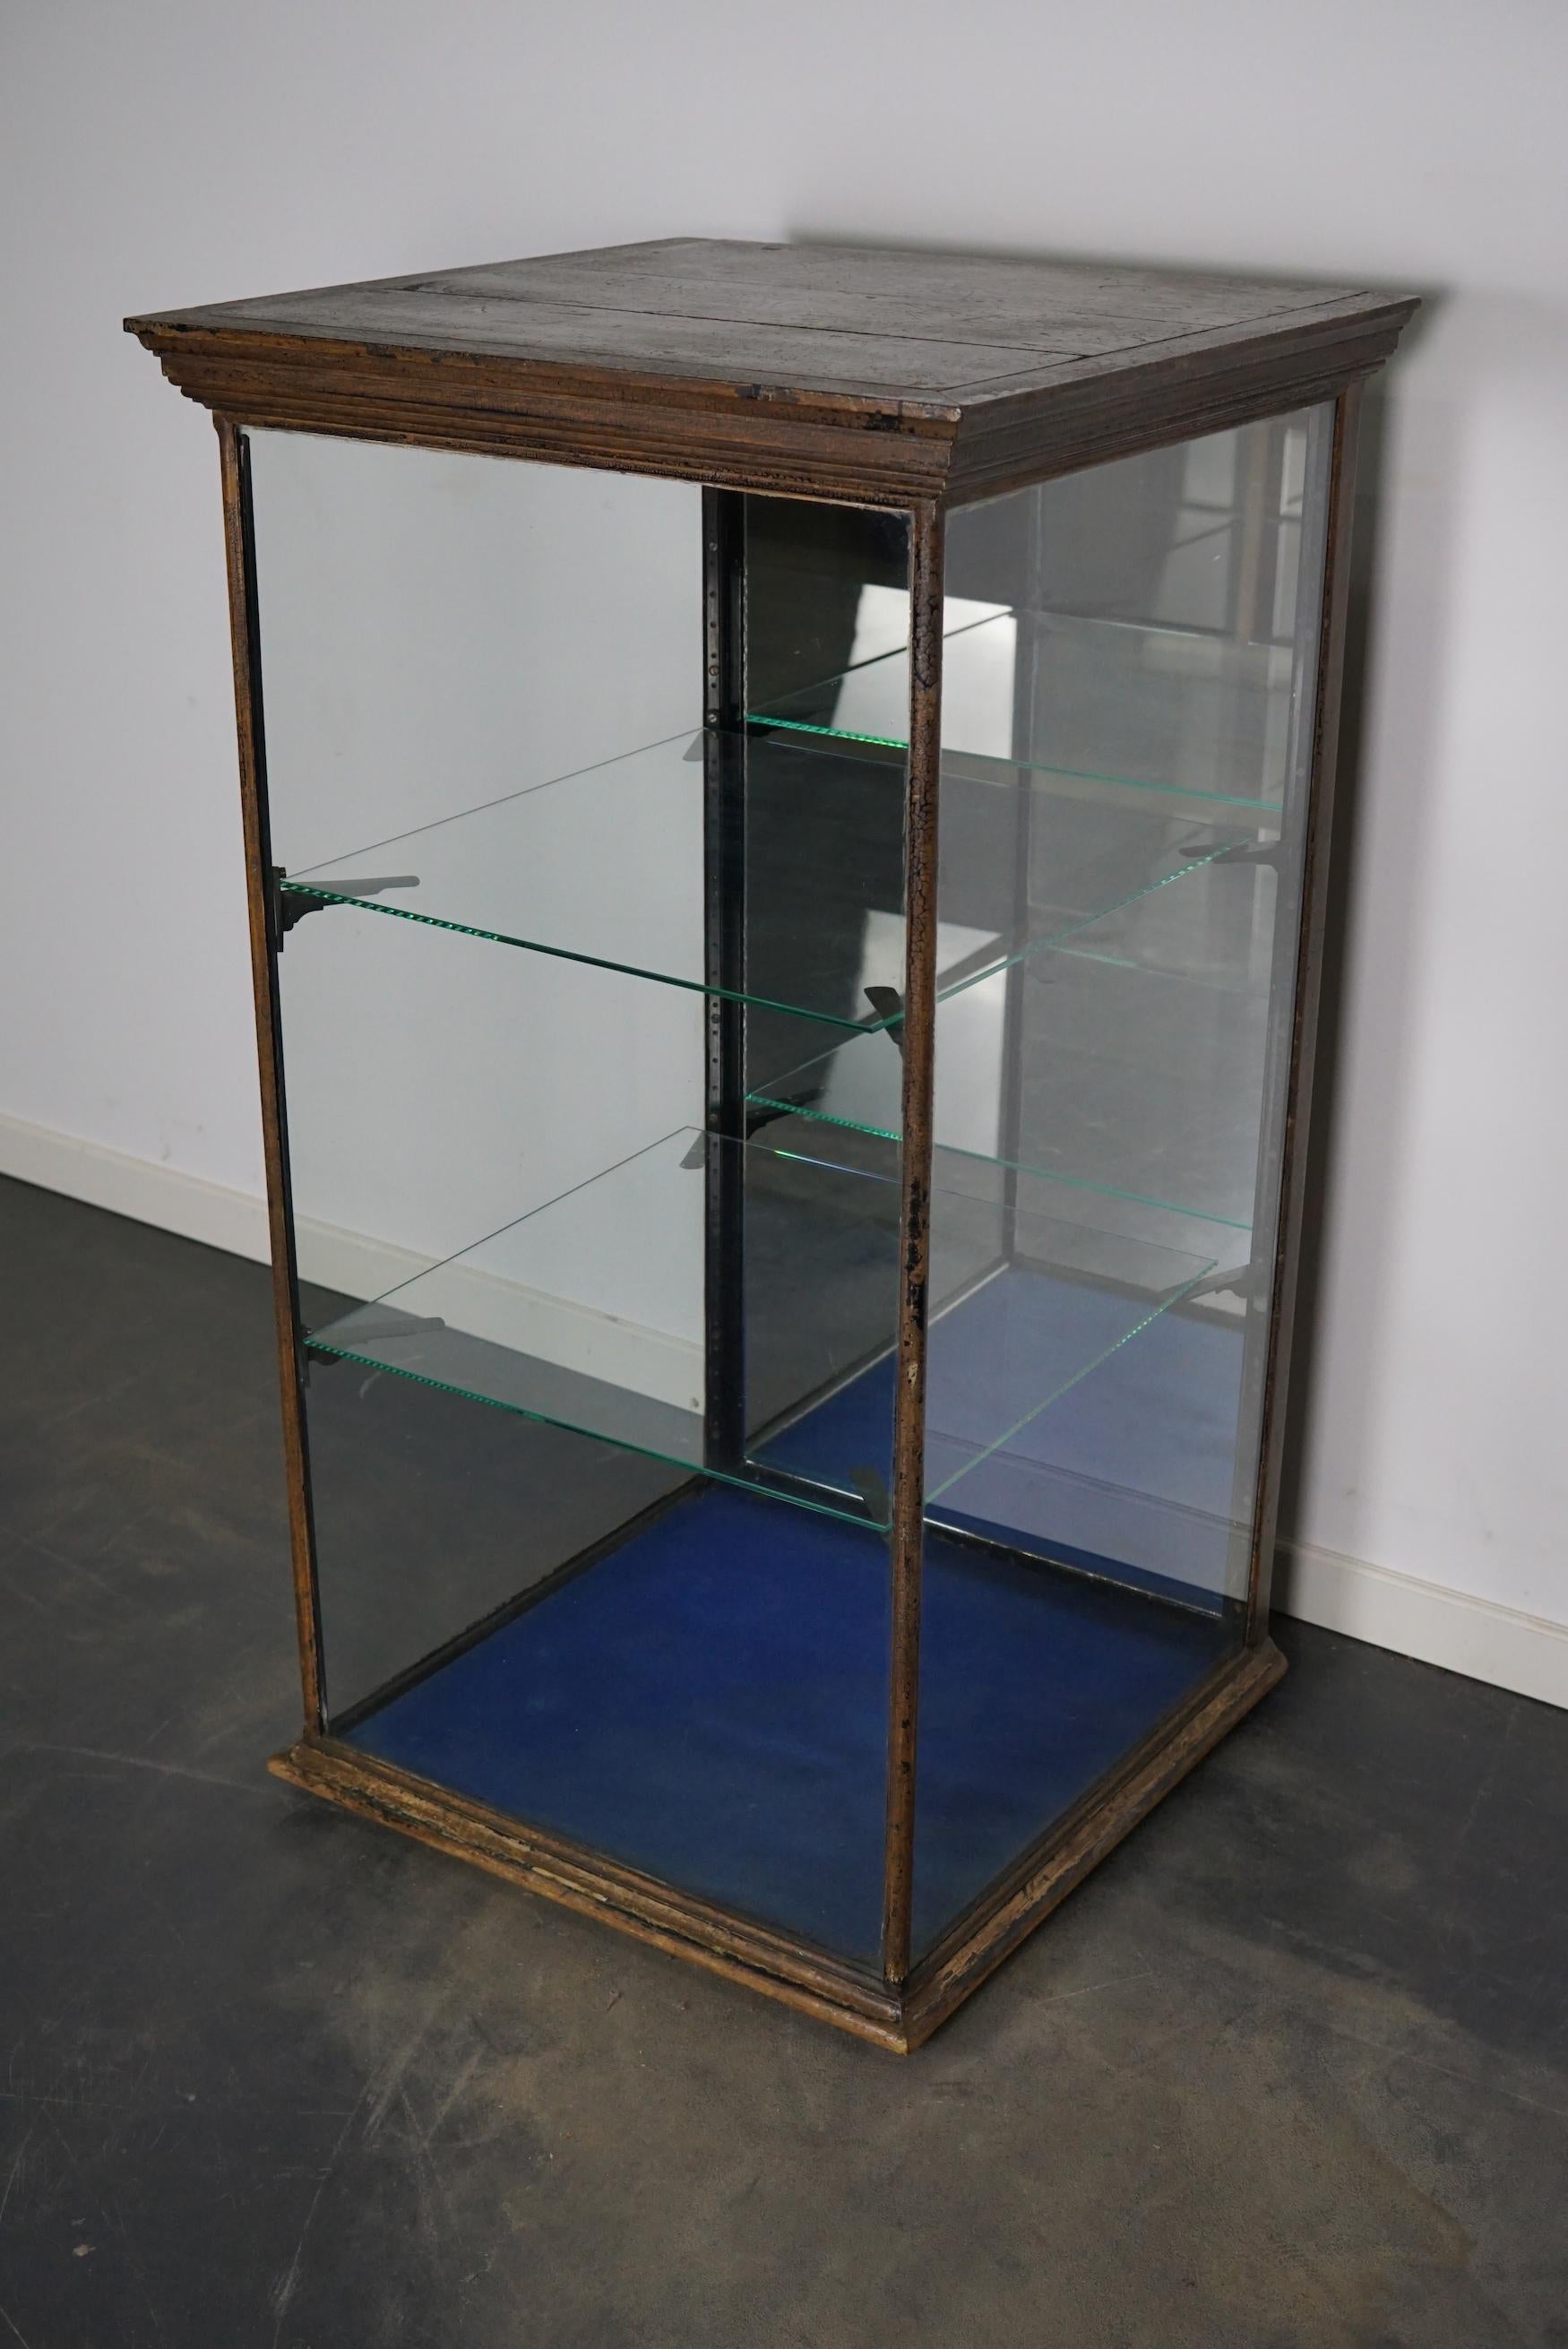 A museum quality Painted Victorian mahogany display cabinet. This outstanding cabinet has a mirrored door fitted with the original handles. It features two shelves on cast brass shelve holders.